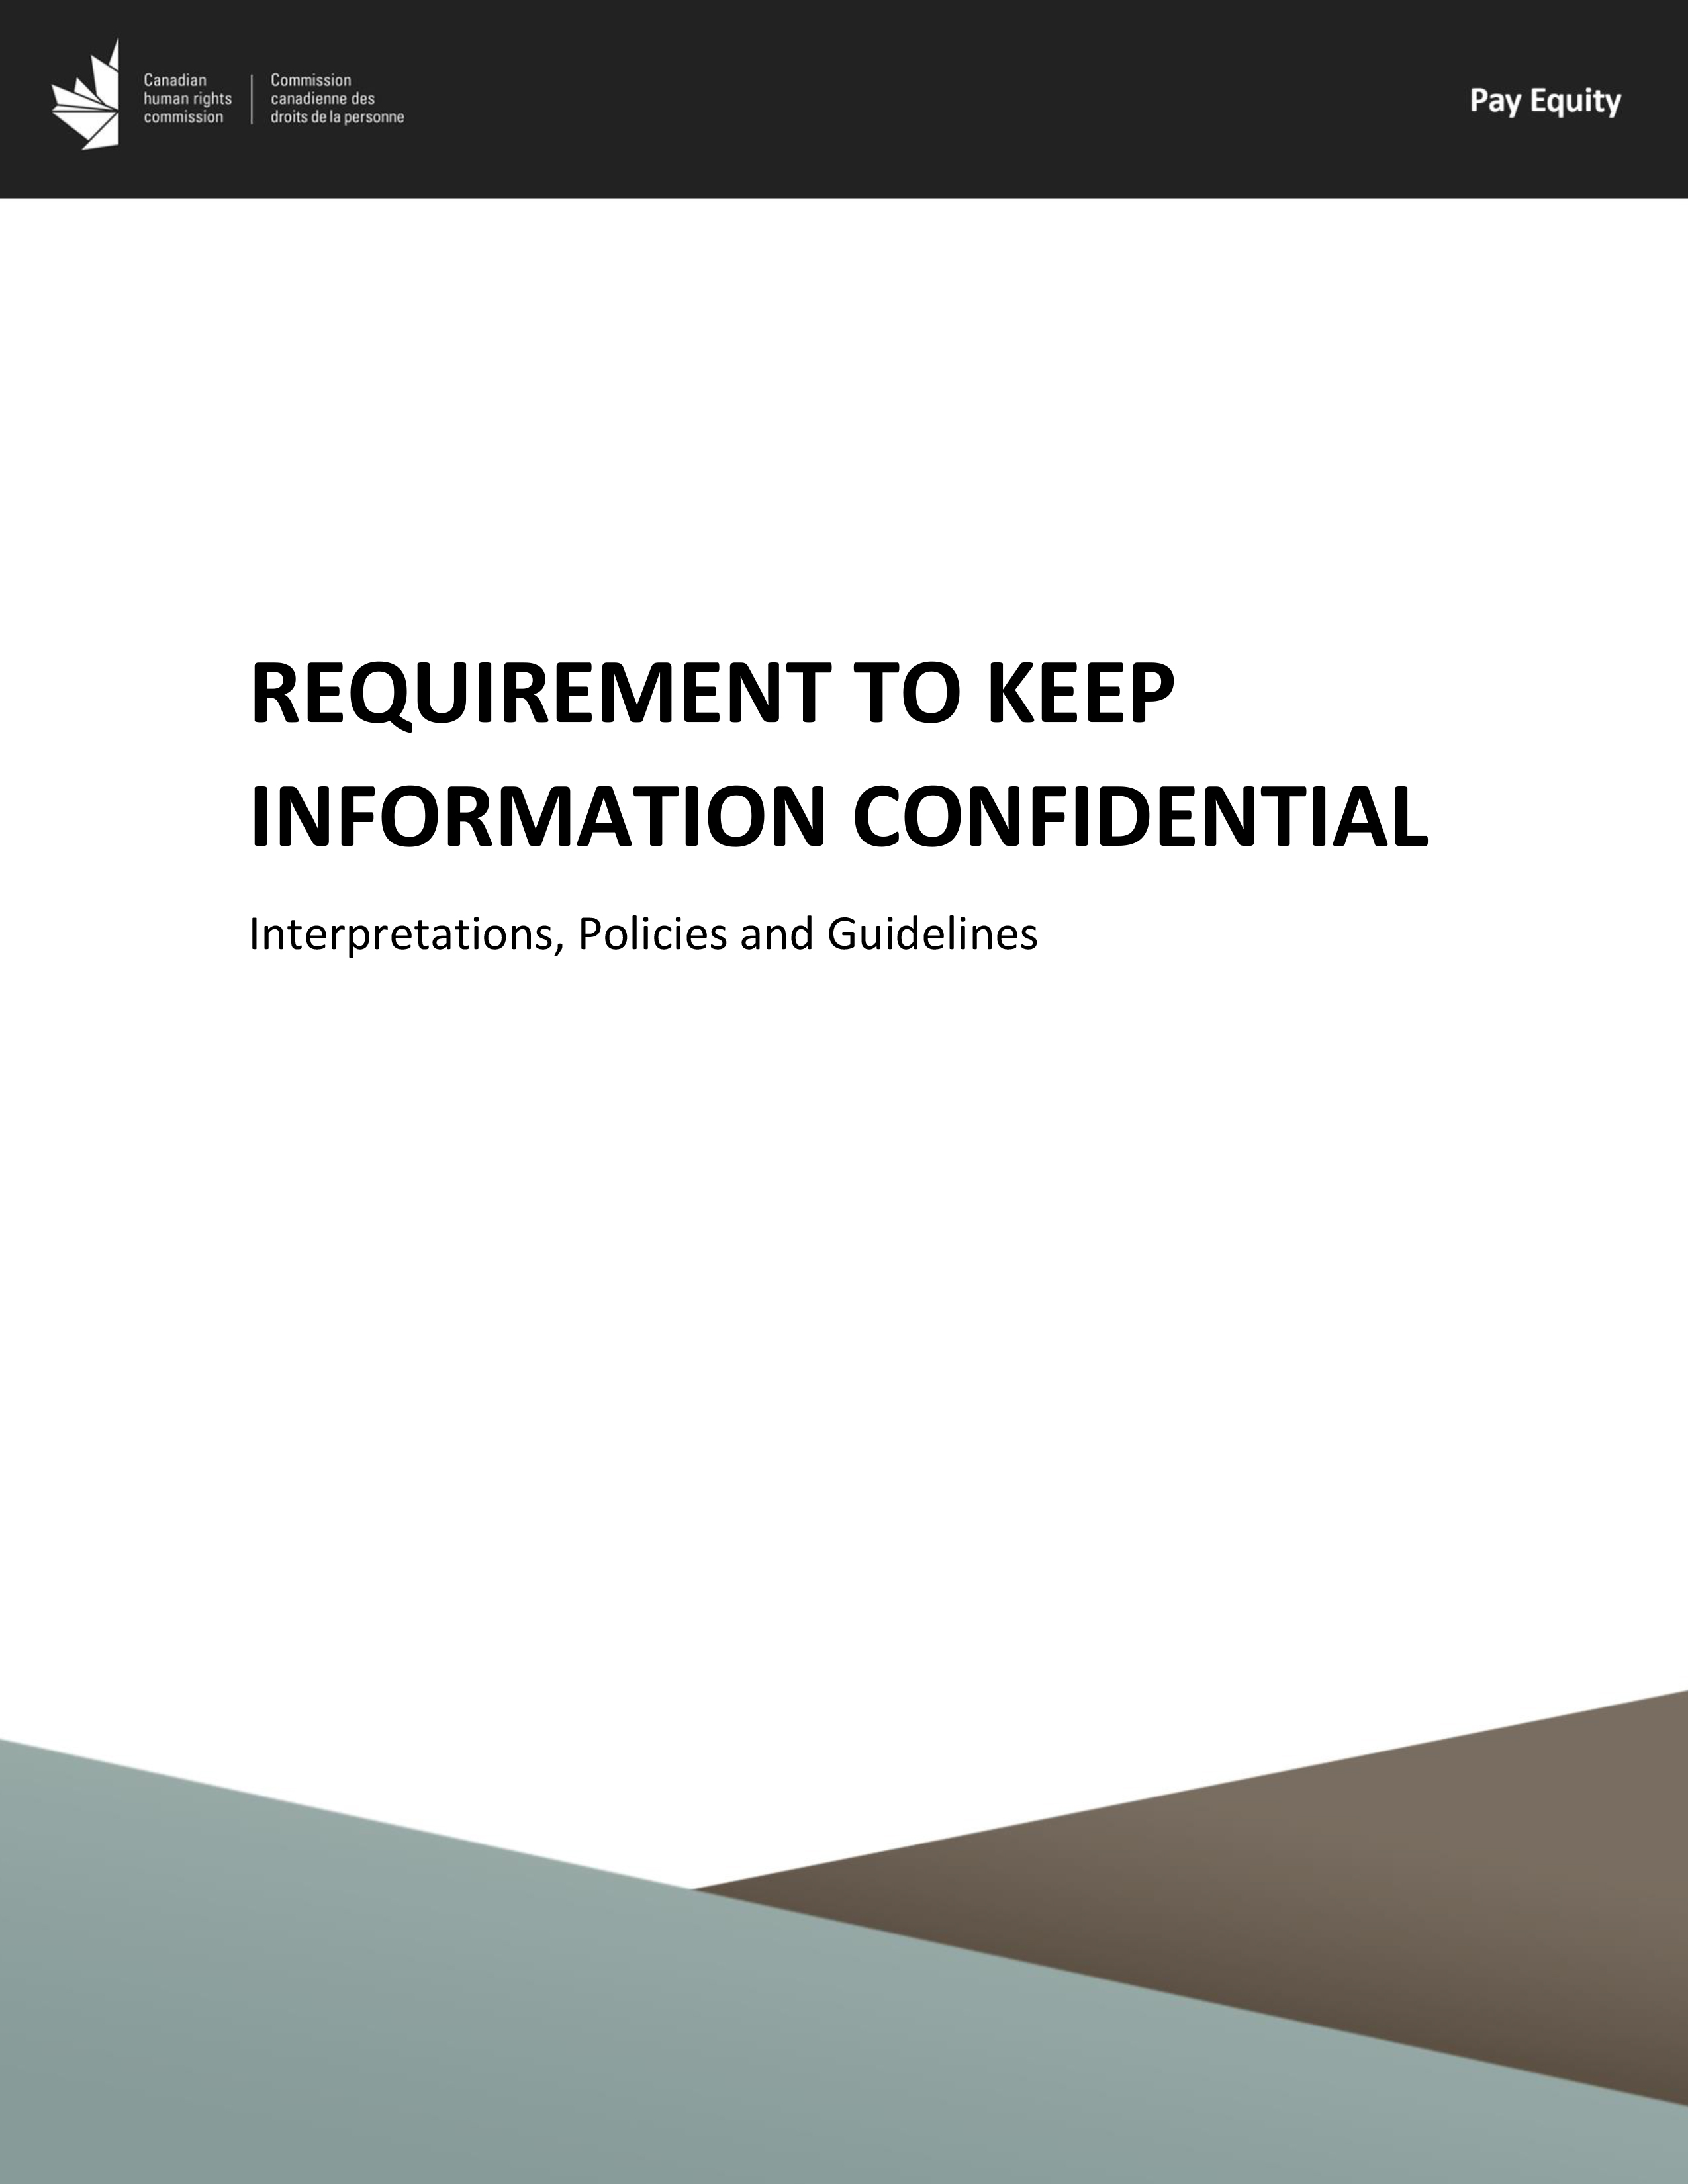 Requirement to keep information confidential: Interpretations, Policies and Guidelines